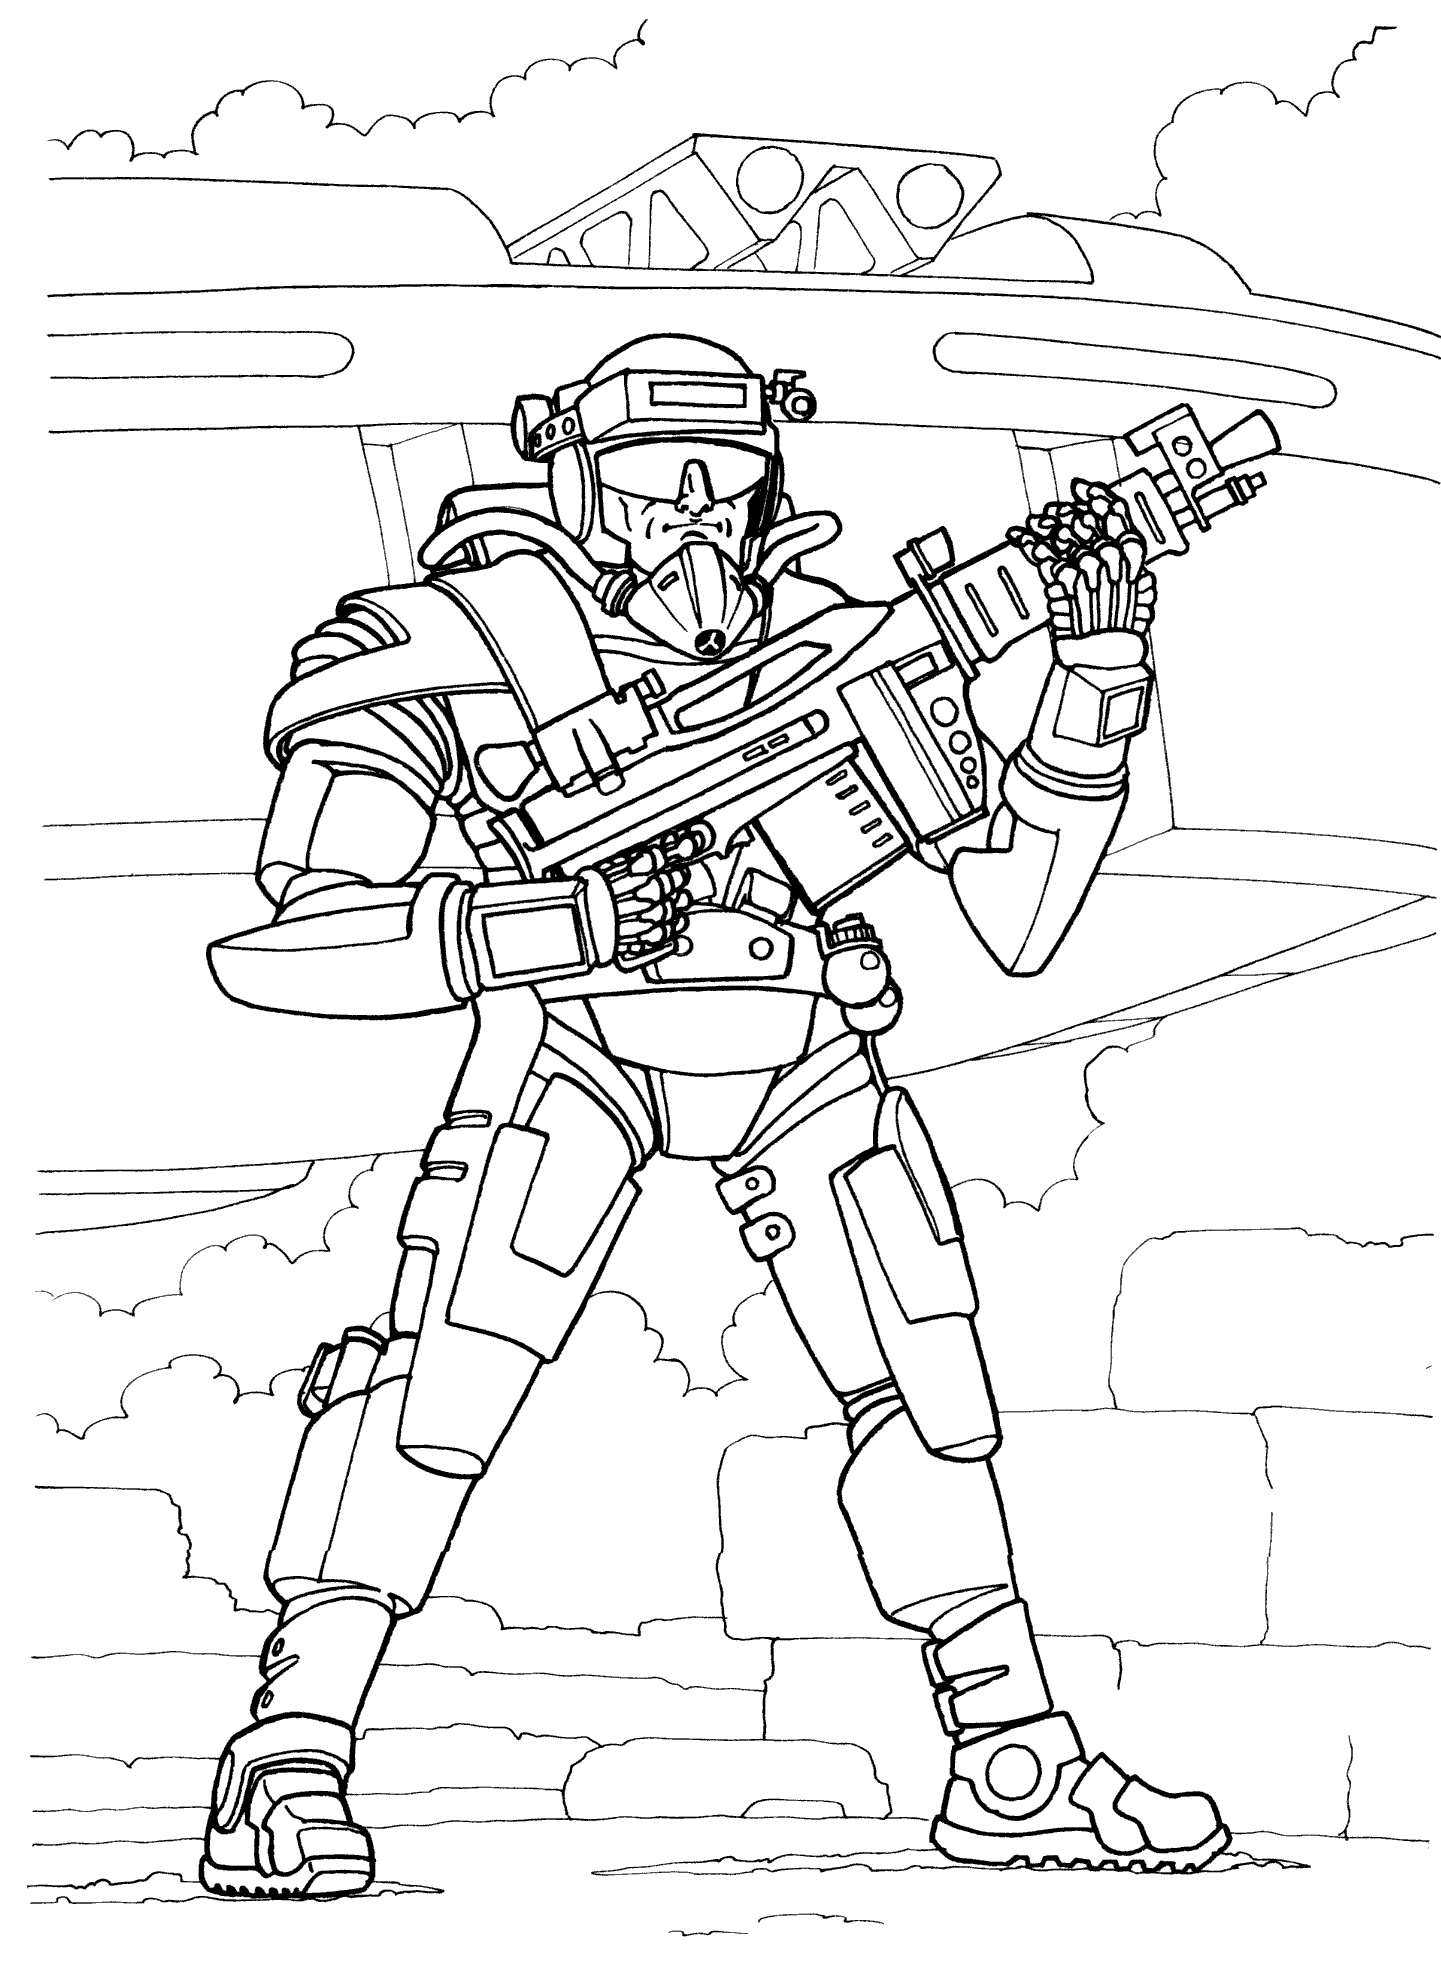 wars coloring pages to print - photo #3